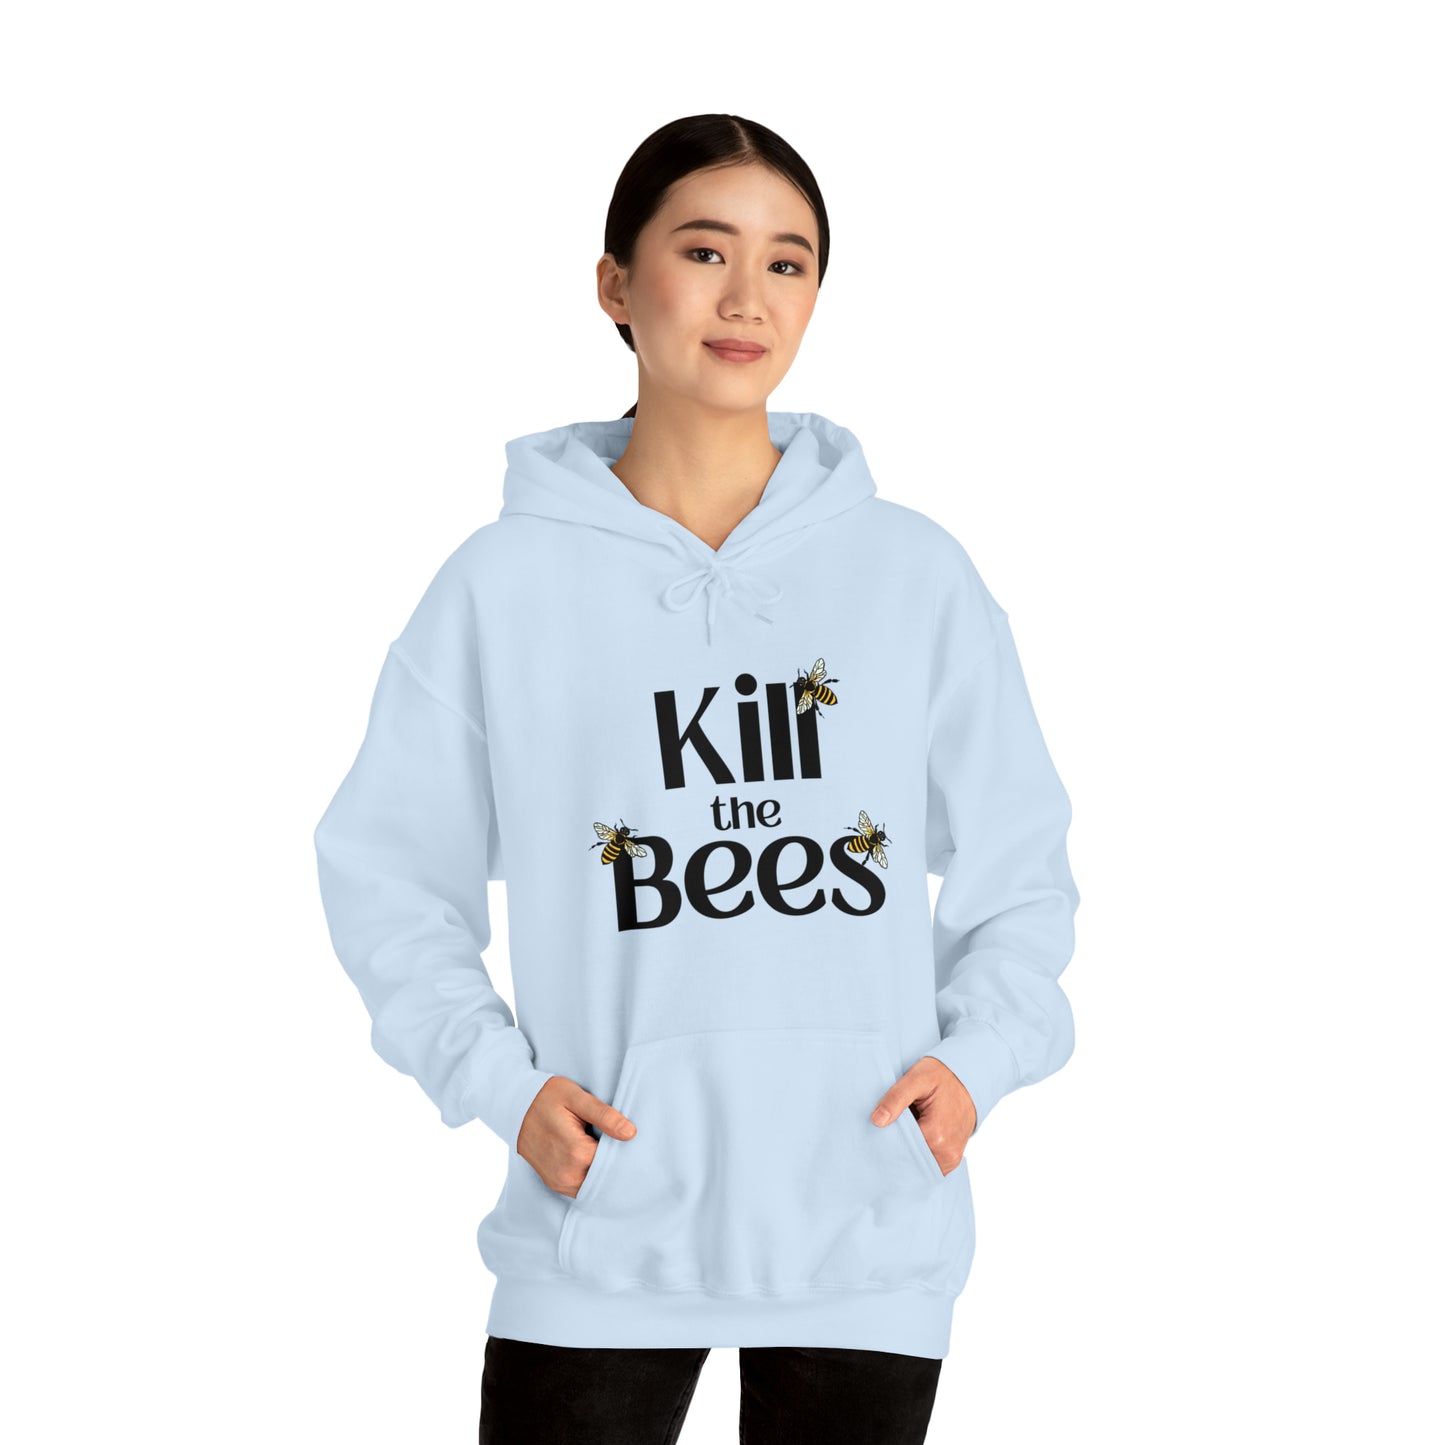 Kill the Bees Hoodie